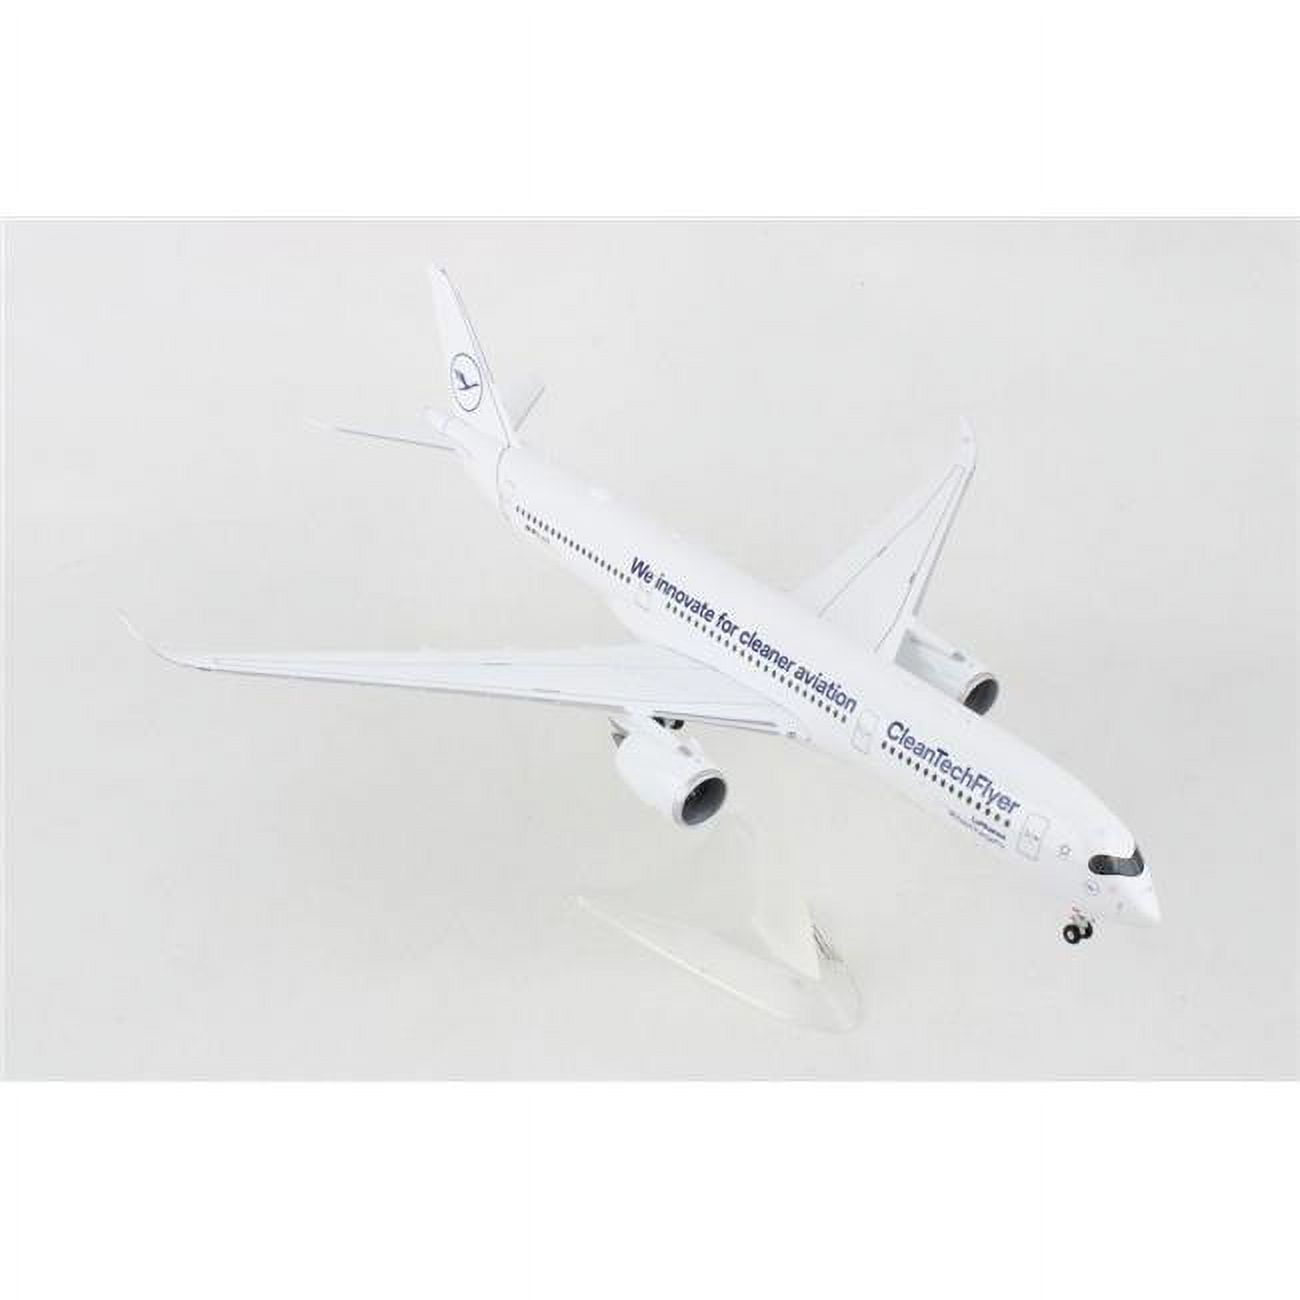 HE572460 1-200 Scale Wings Lufthansa A350 Model Airplane -  Herpa